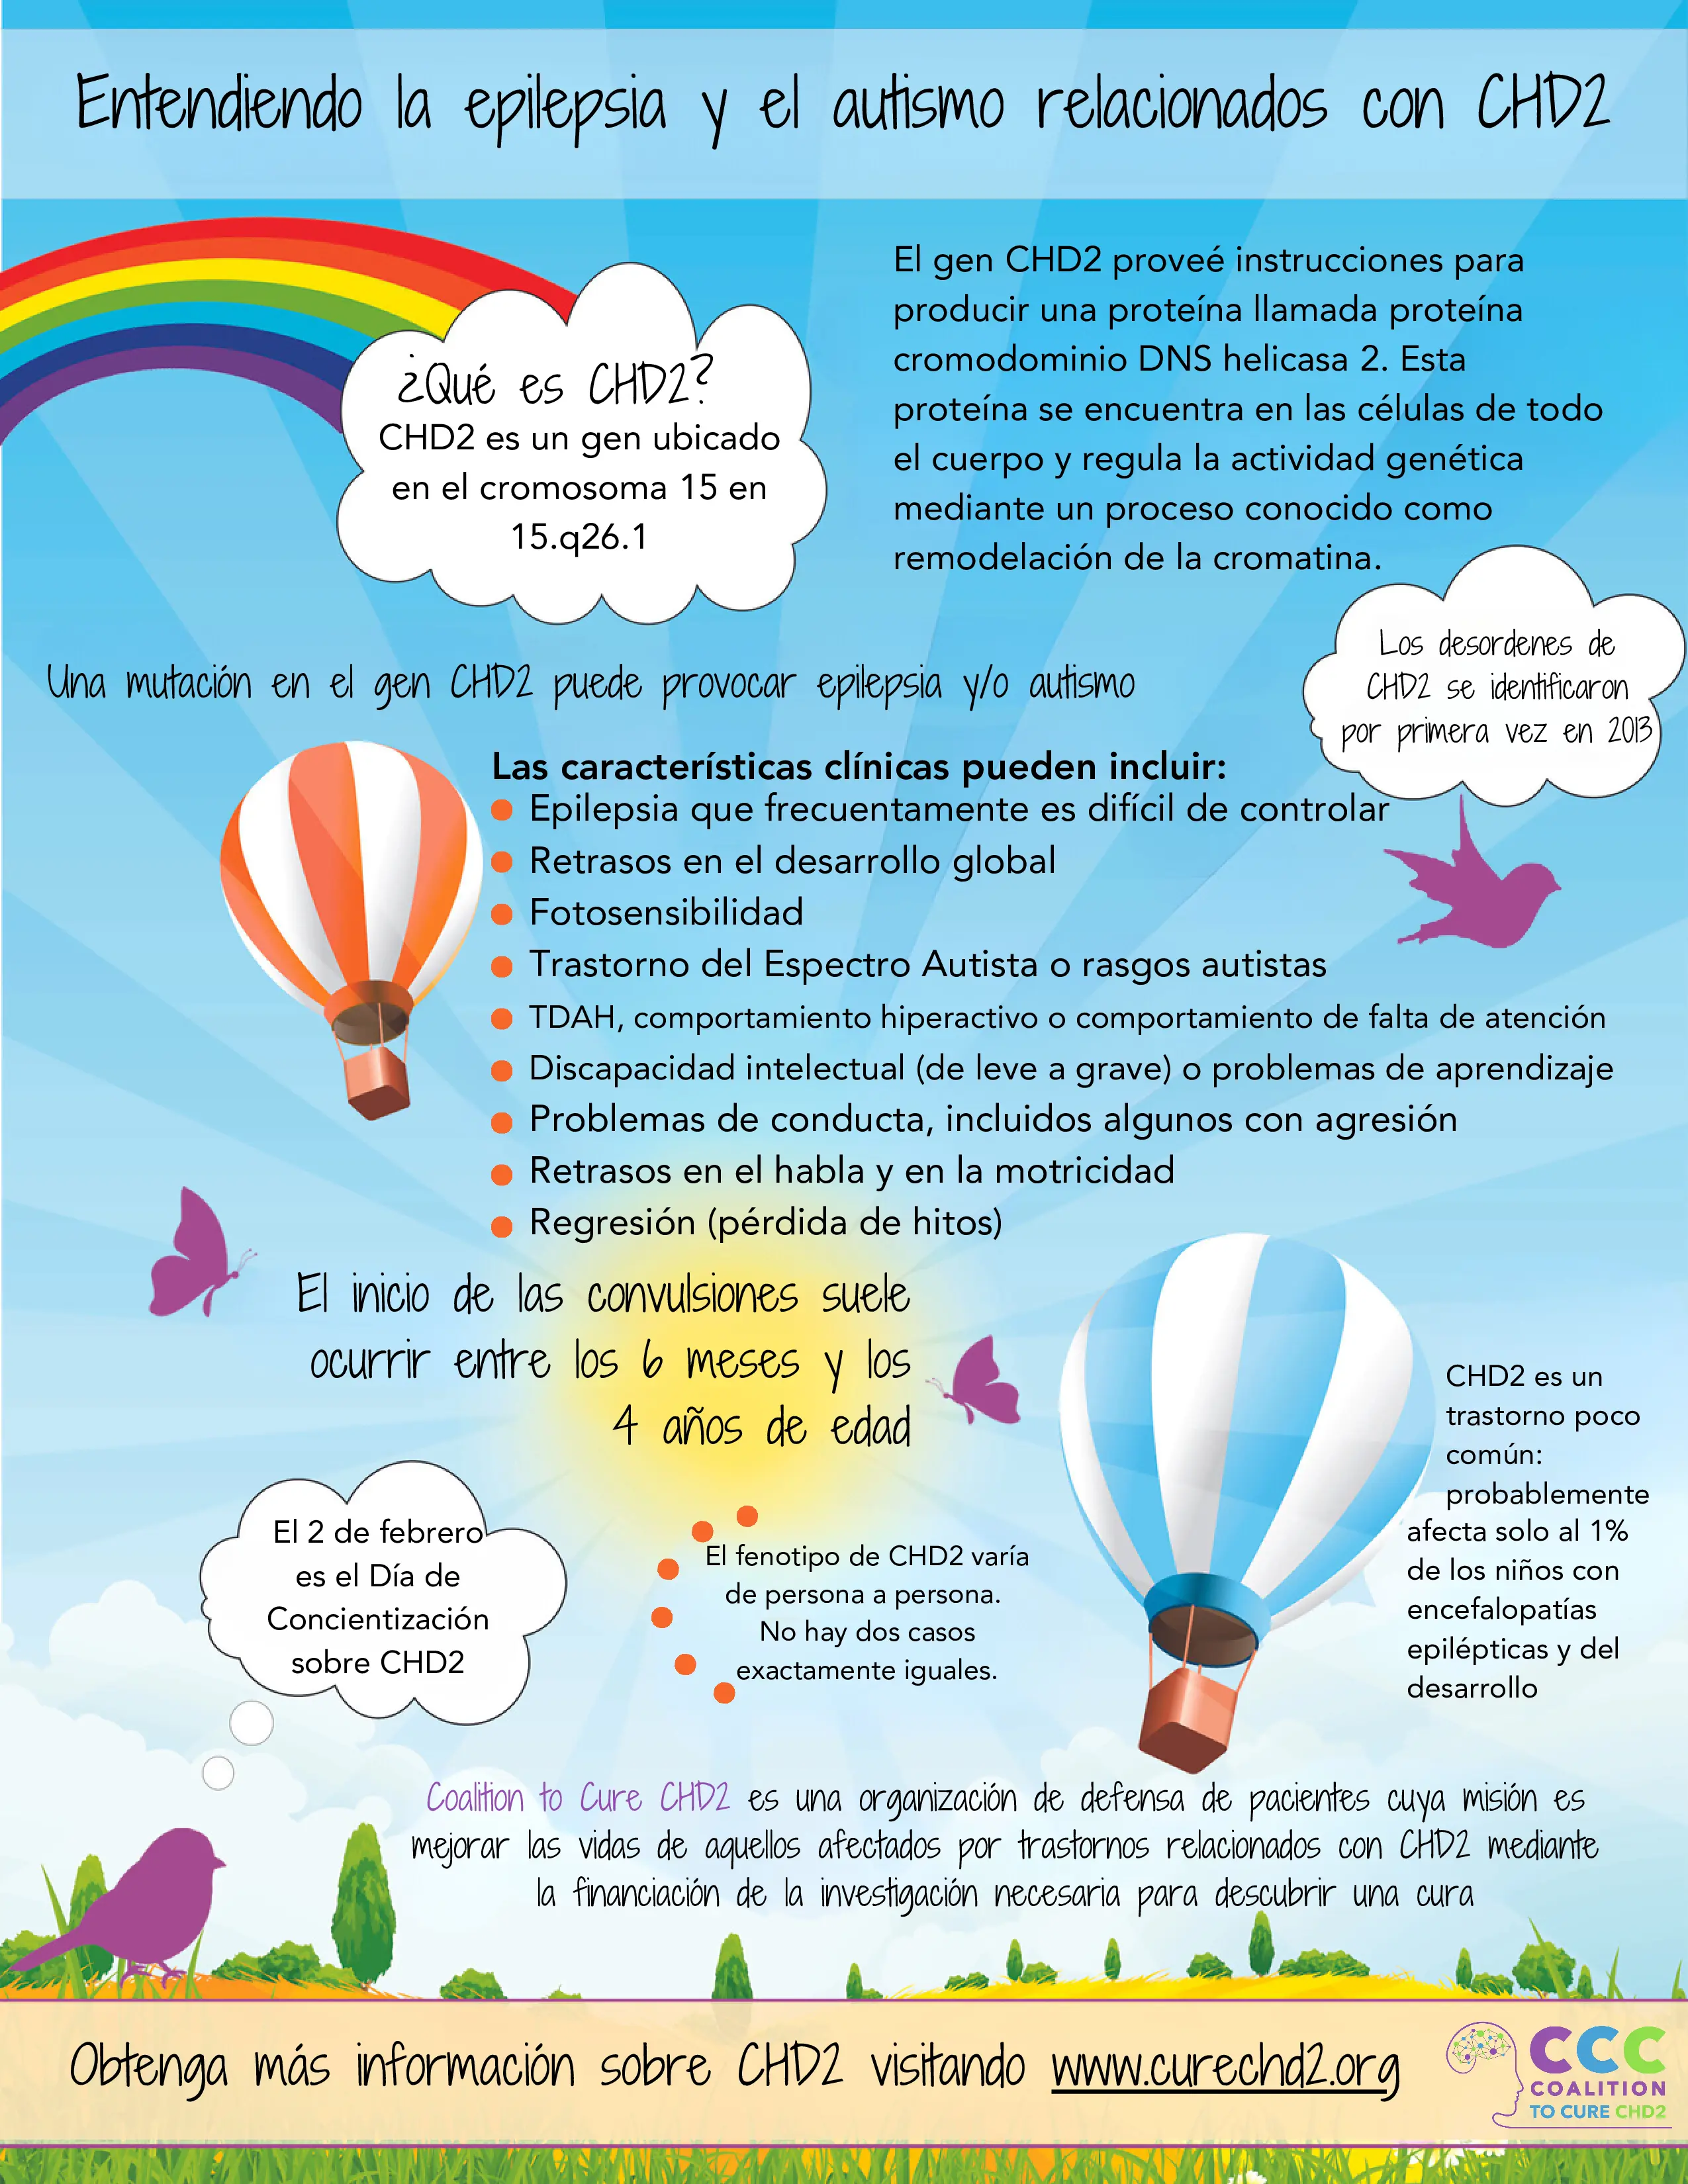 infographic about chd2 Spanish